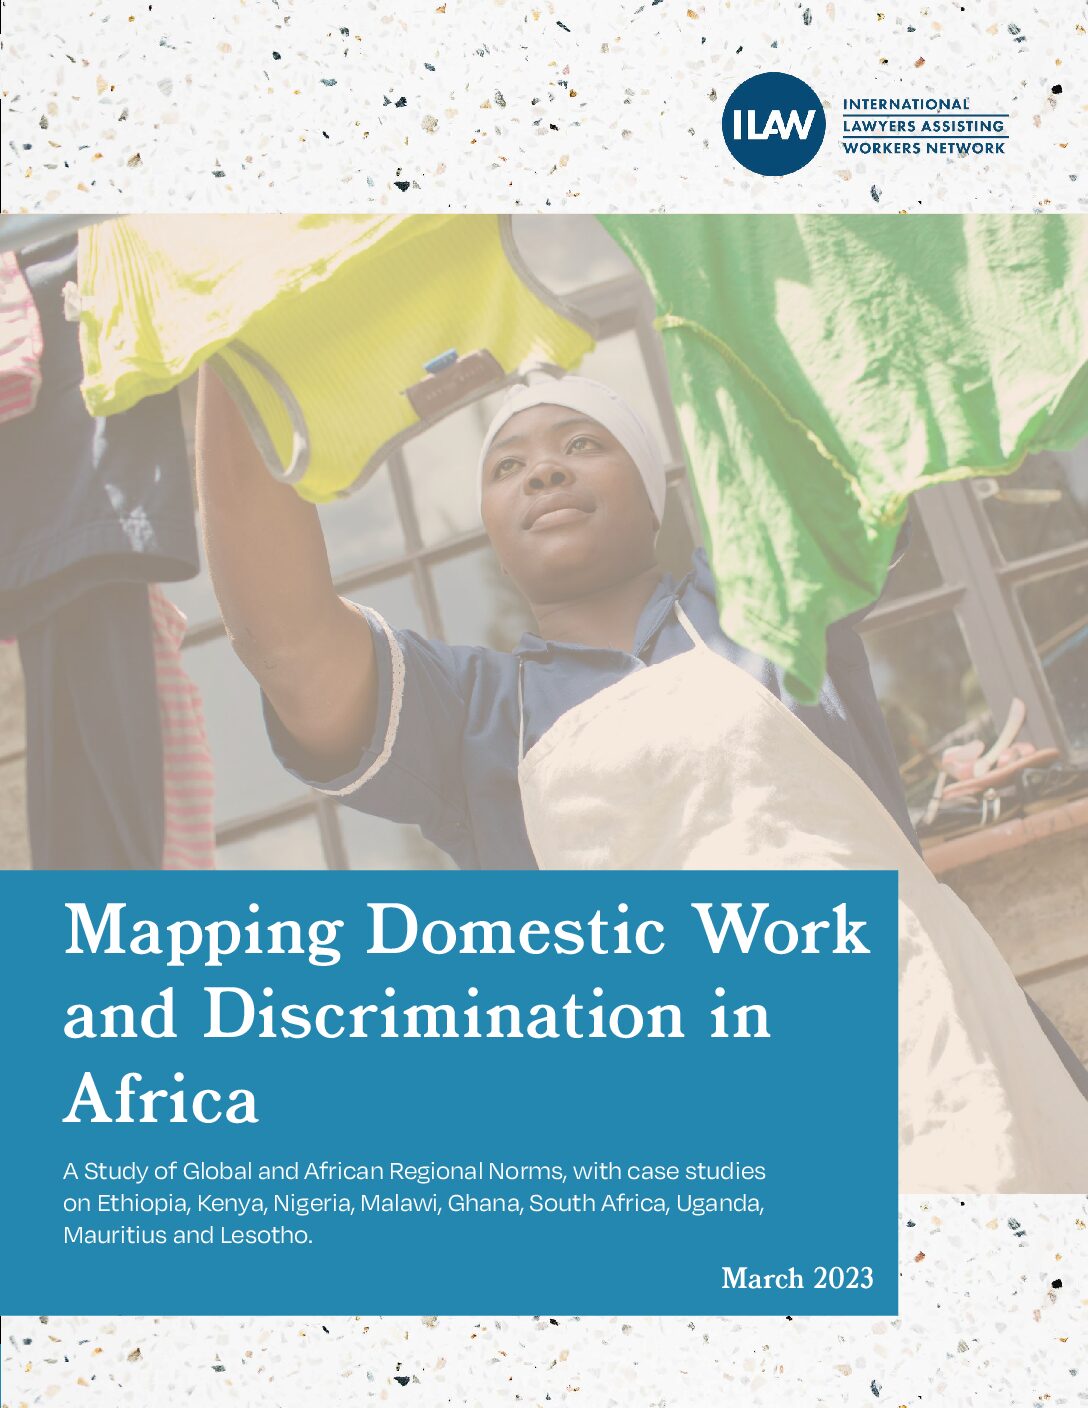 Mapping Domestic Work and Discrimination in Africa